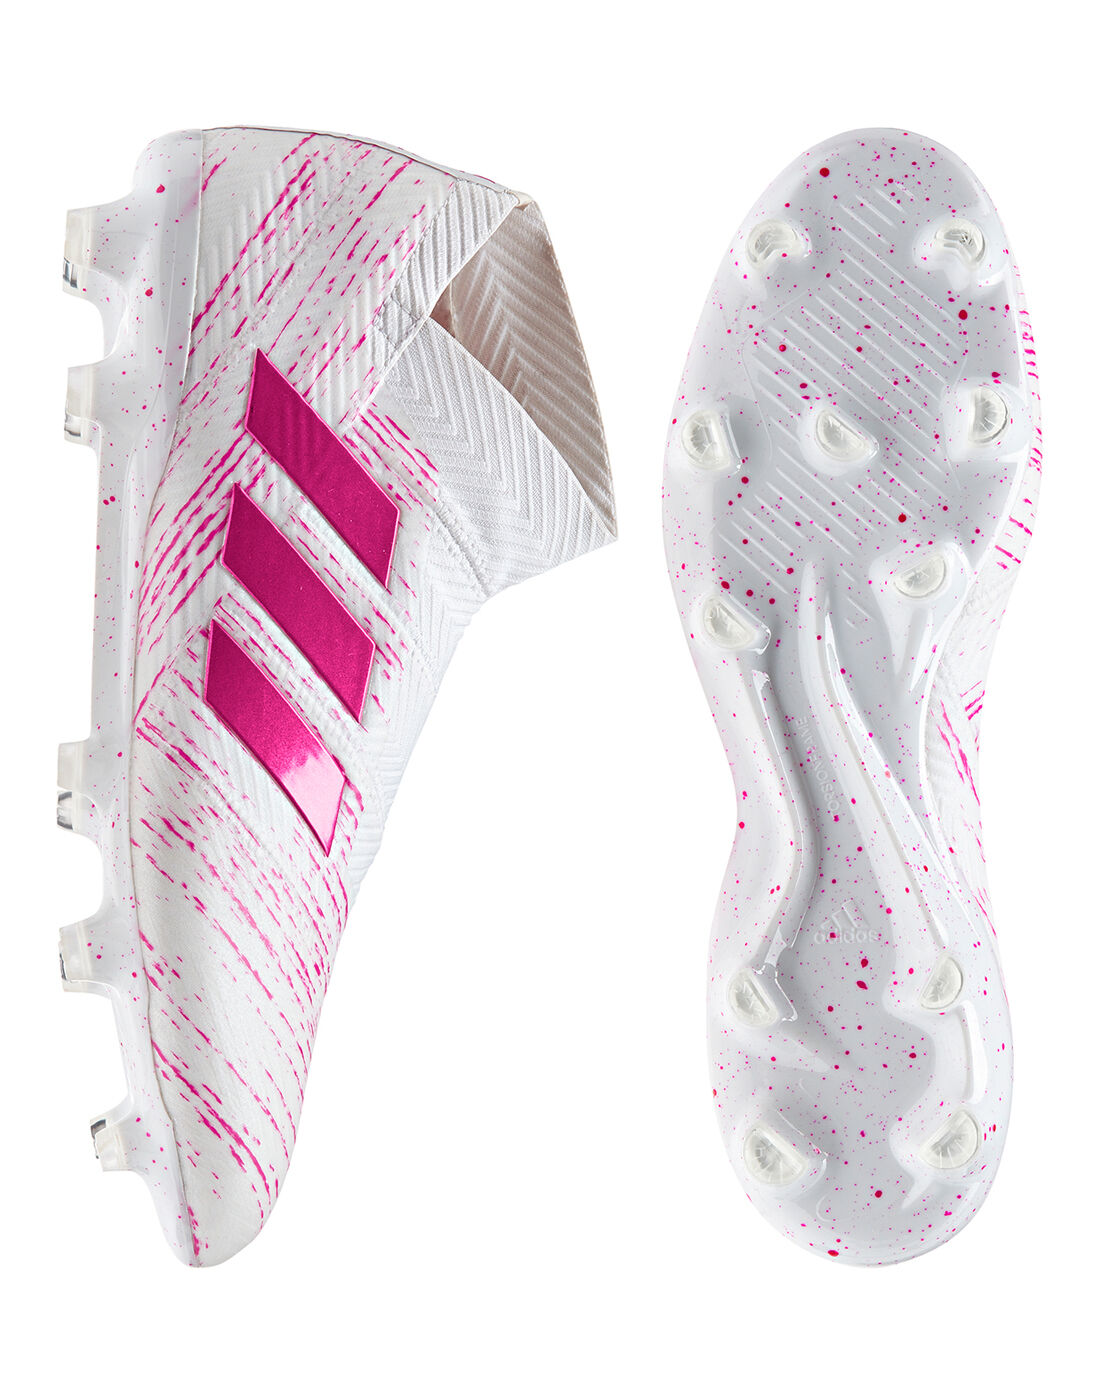 white and pink adidas boots